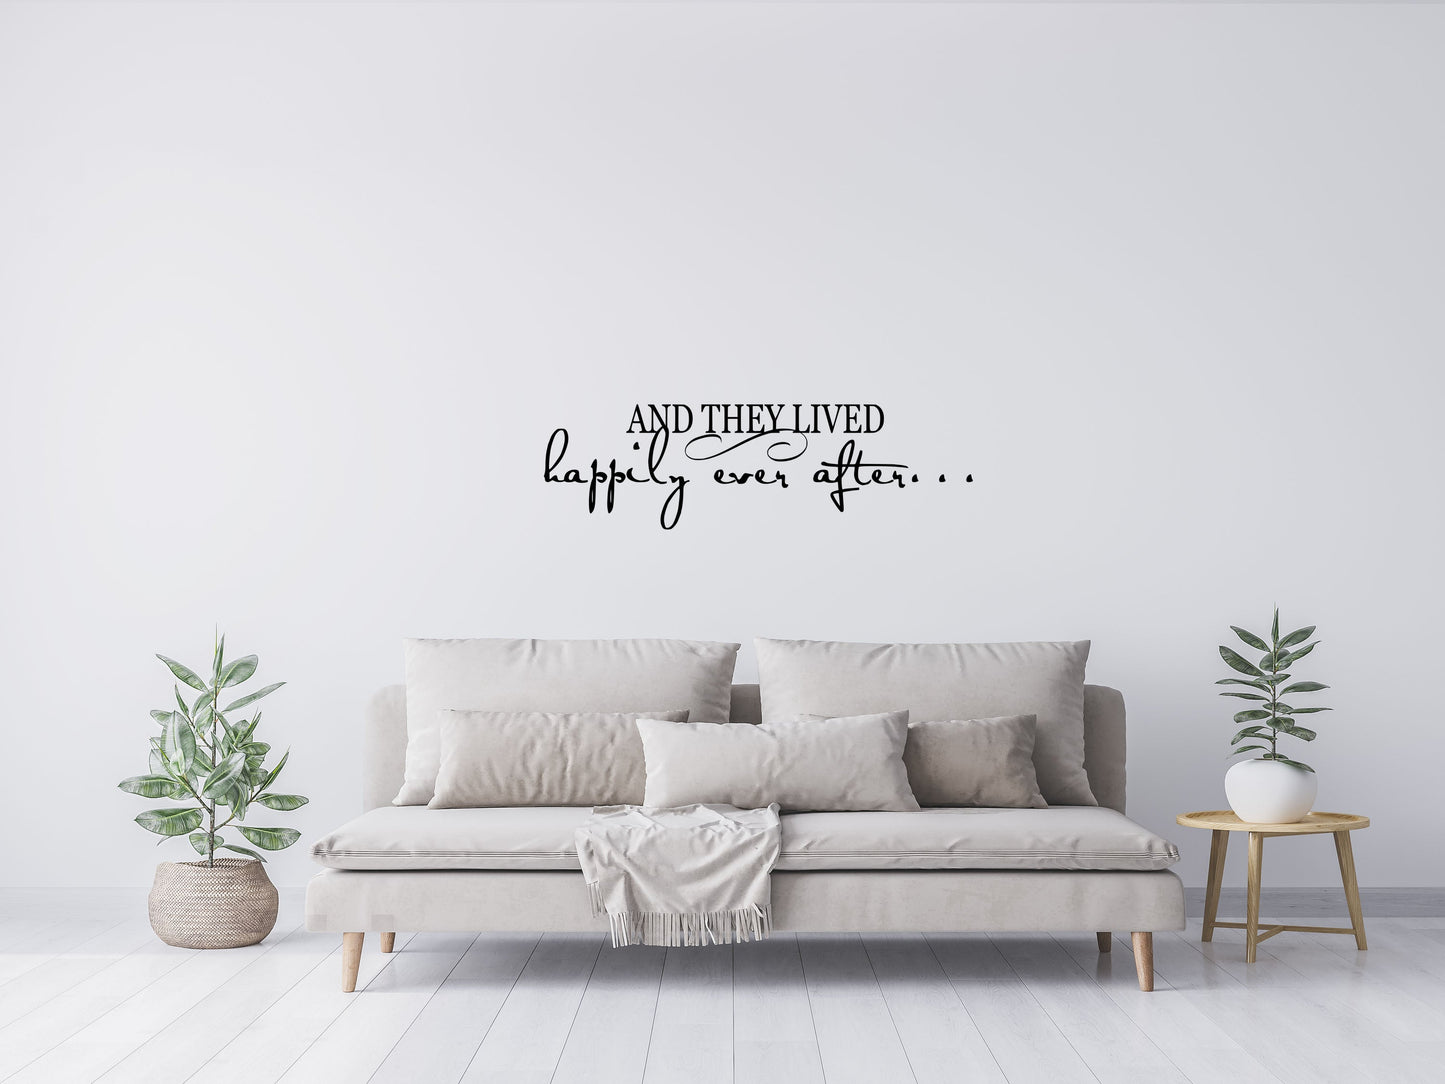 They Lived Happily Ever After - Inspirational Wall Decals Vinyl Wall Decal Done 